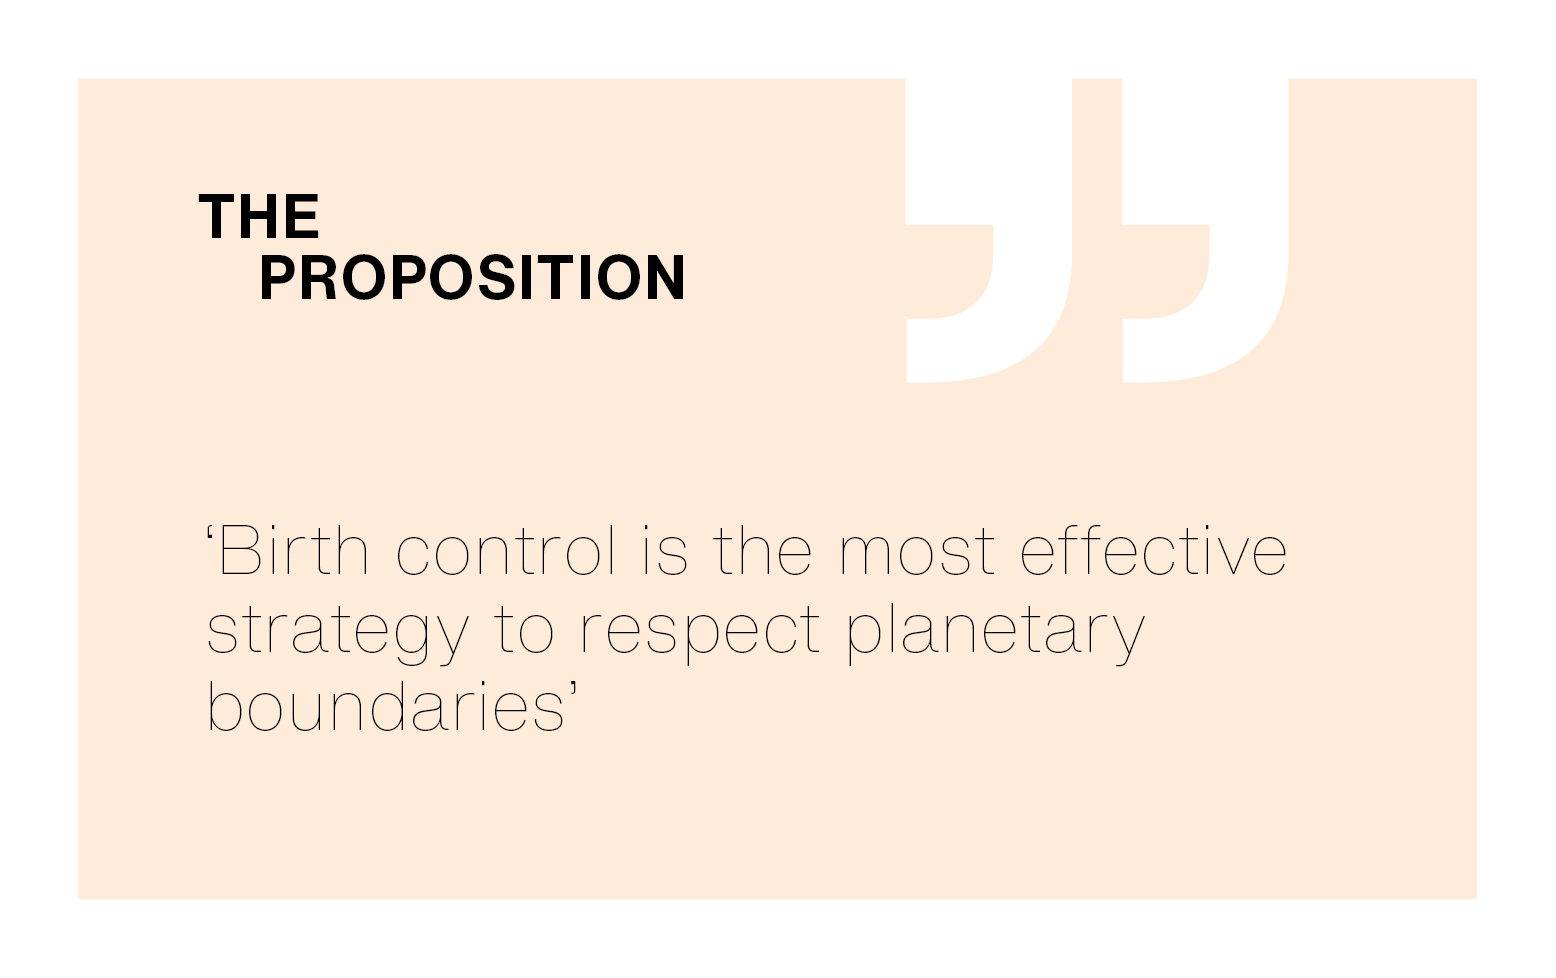 [The Proposition] ‘Birth control is the most effective strategy to respect planetary boundaries’